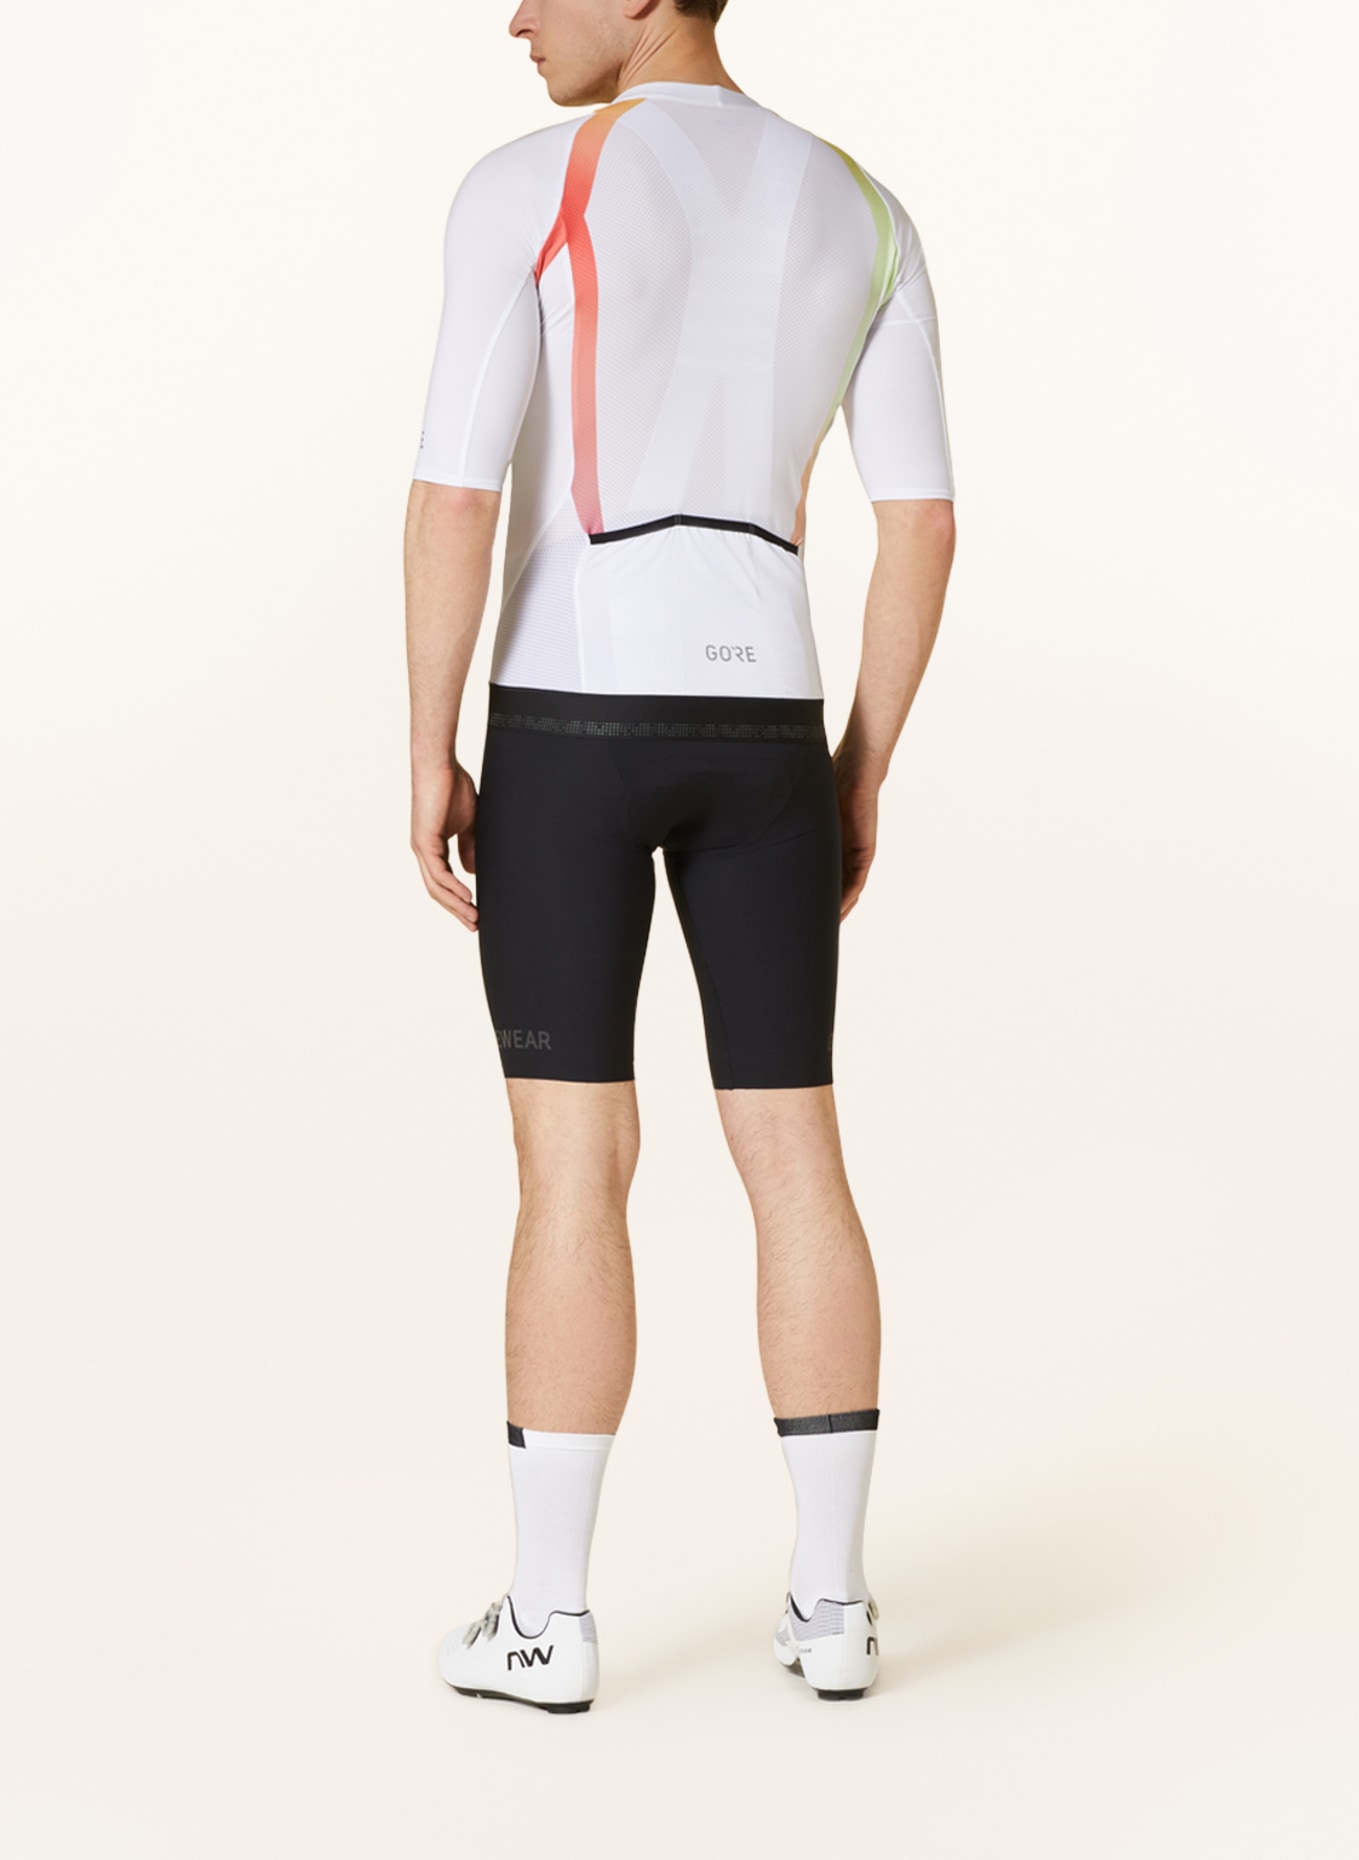 GORE BIKE WEAR Cycling jersey CHASE with mesh, Color: WHITE/ SALMON/ LIGHT GREEN (Image 3)